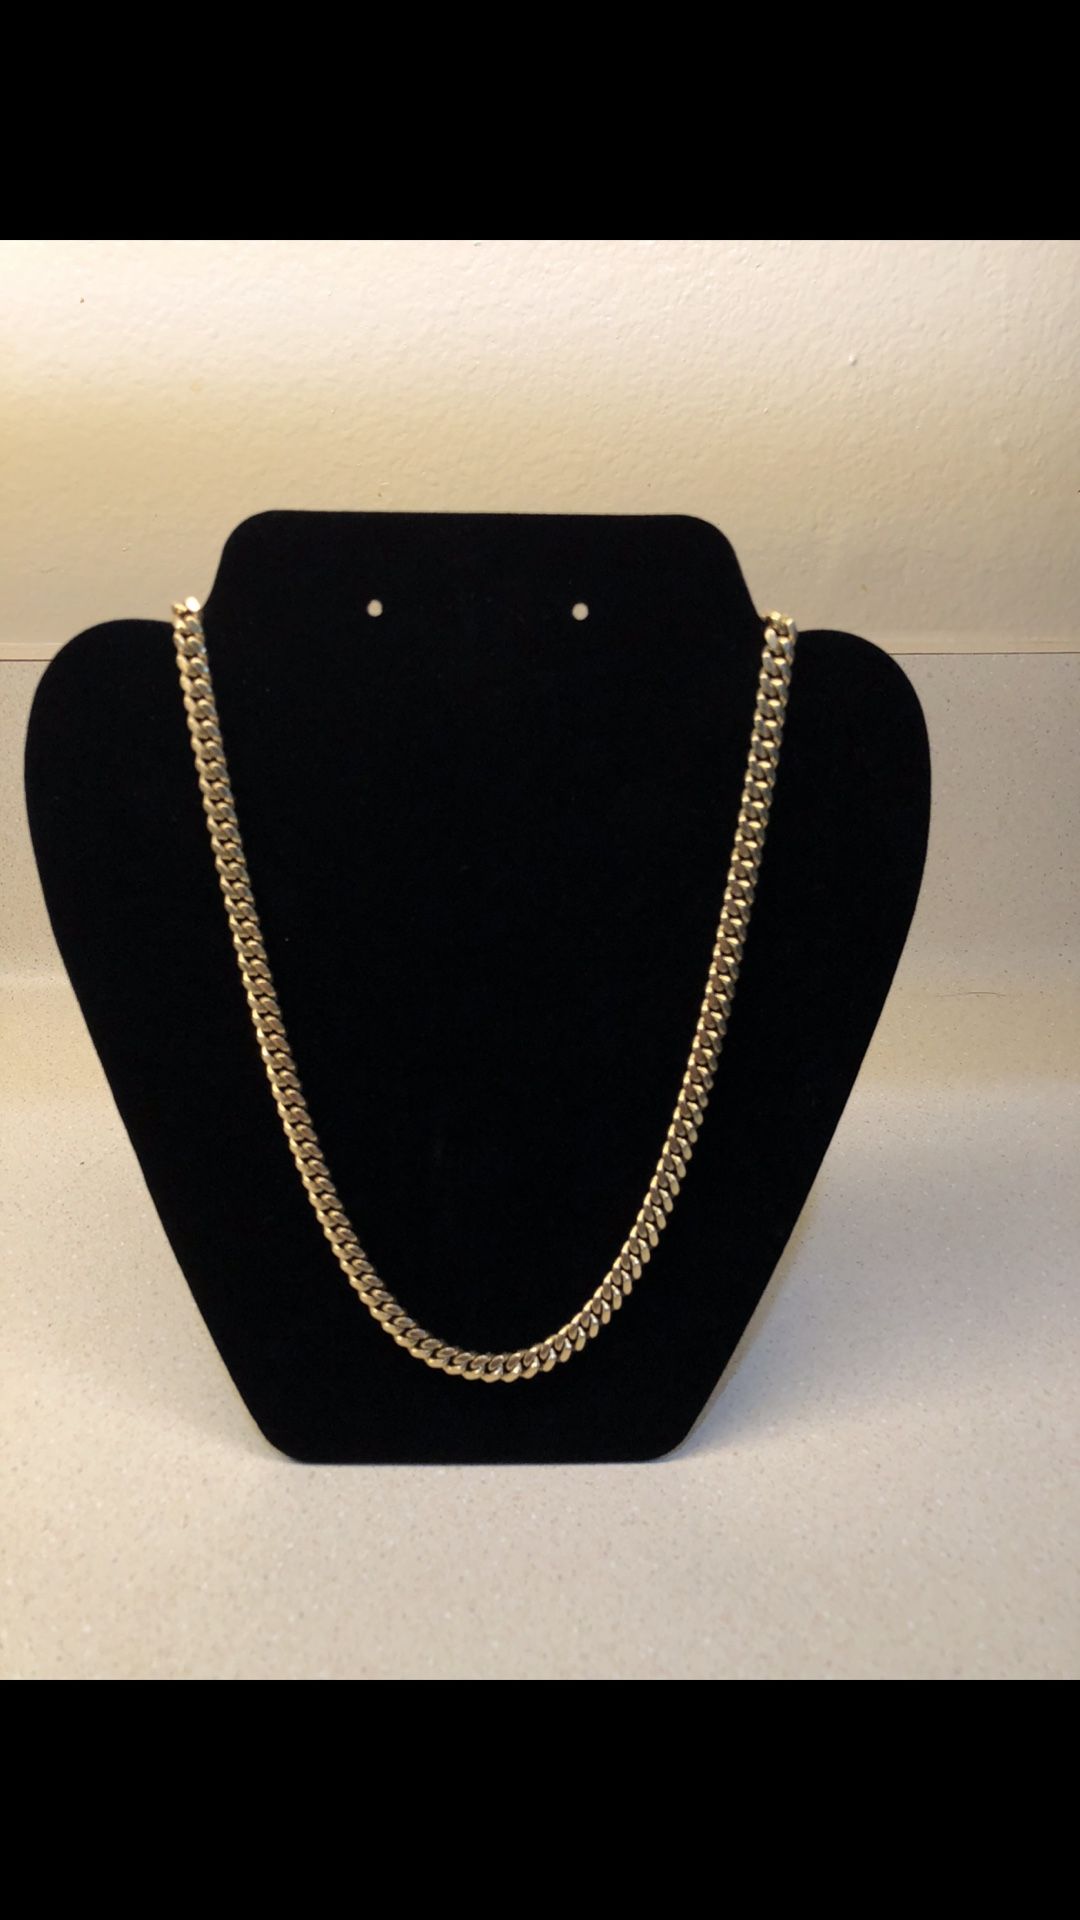 14 KT Gold Cuban Link Chain Necklace 